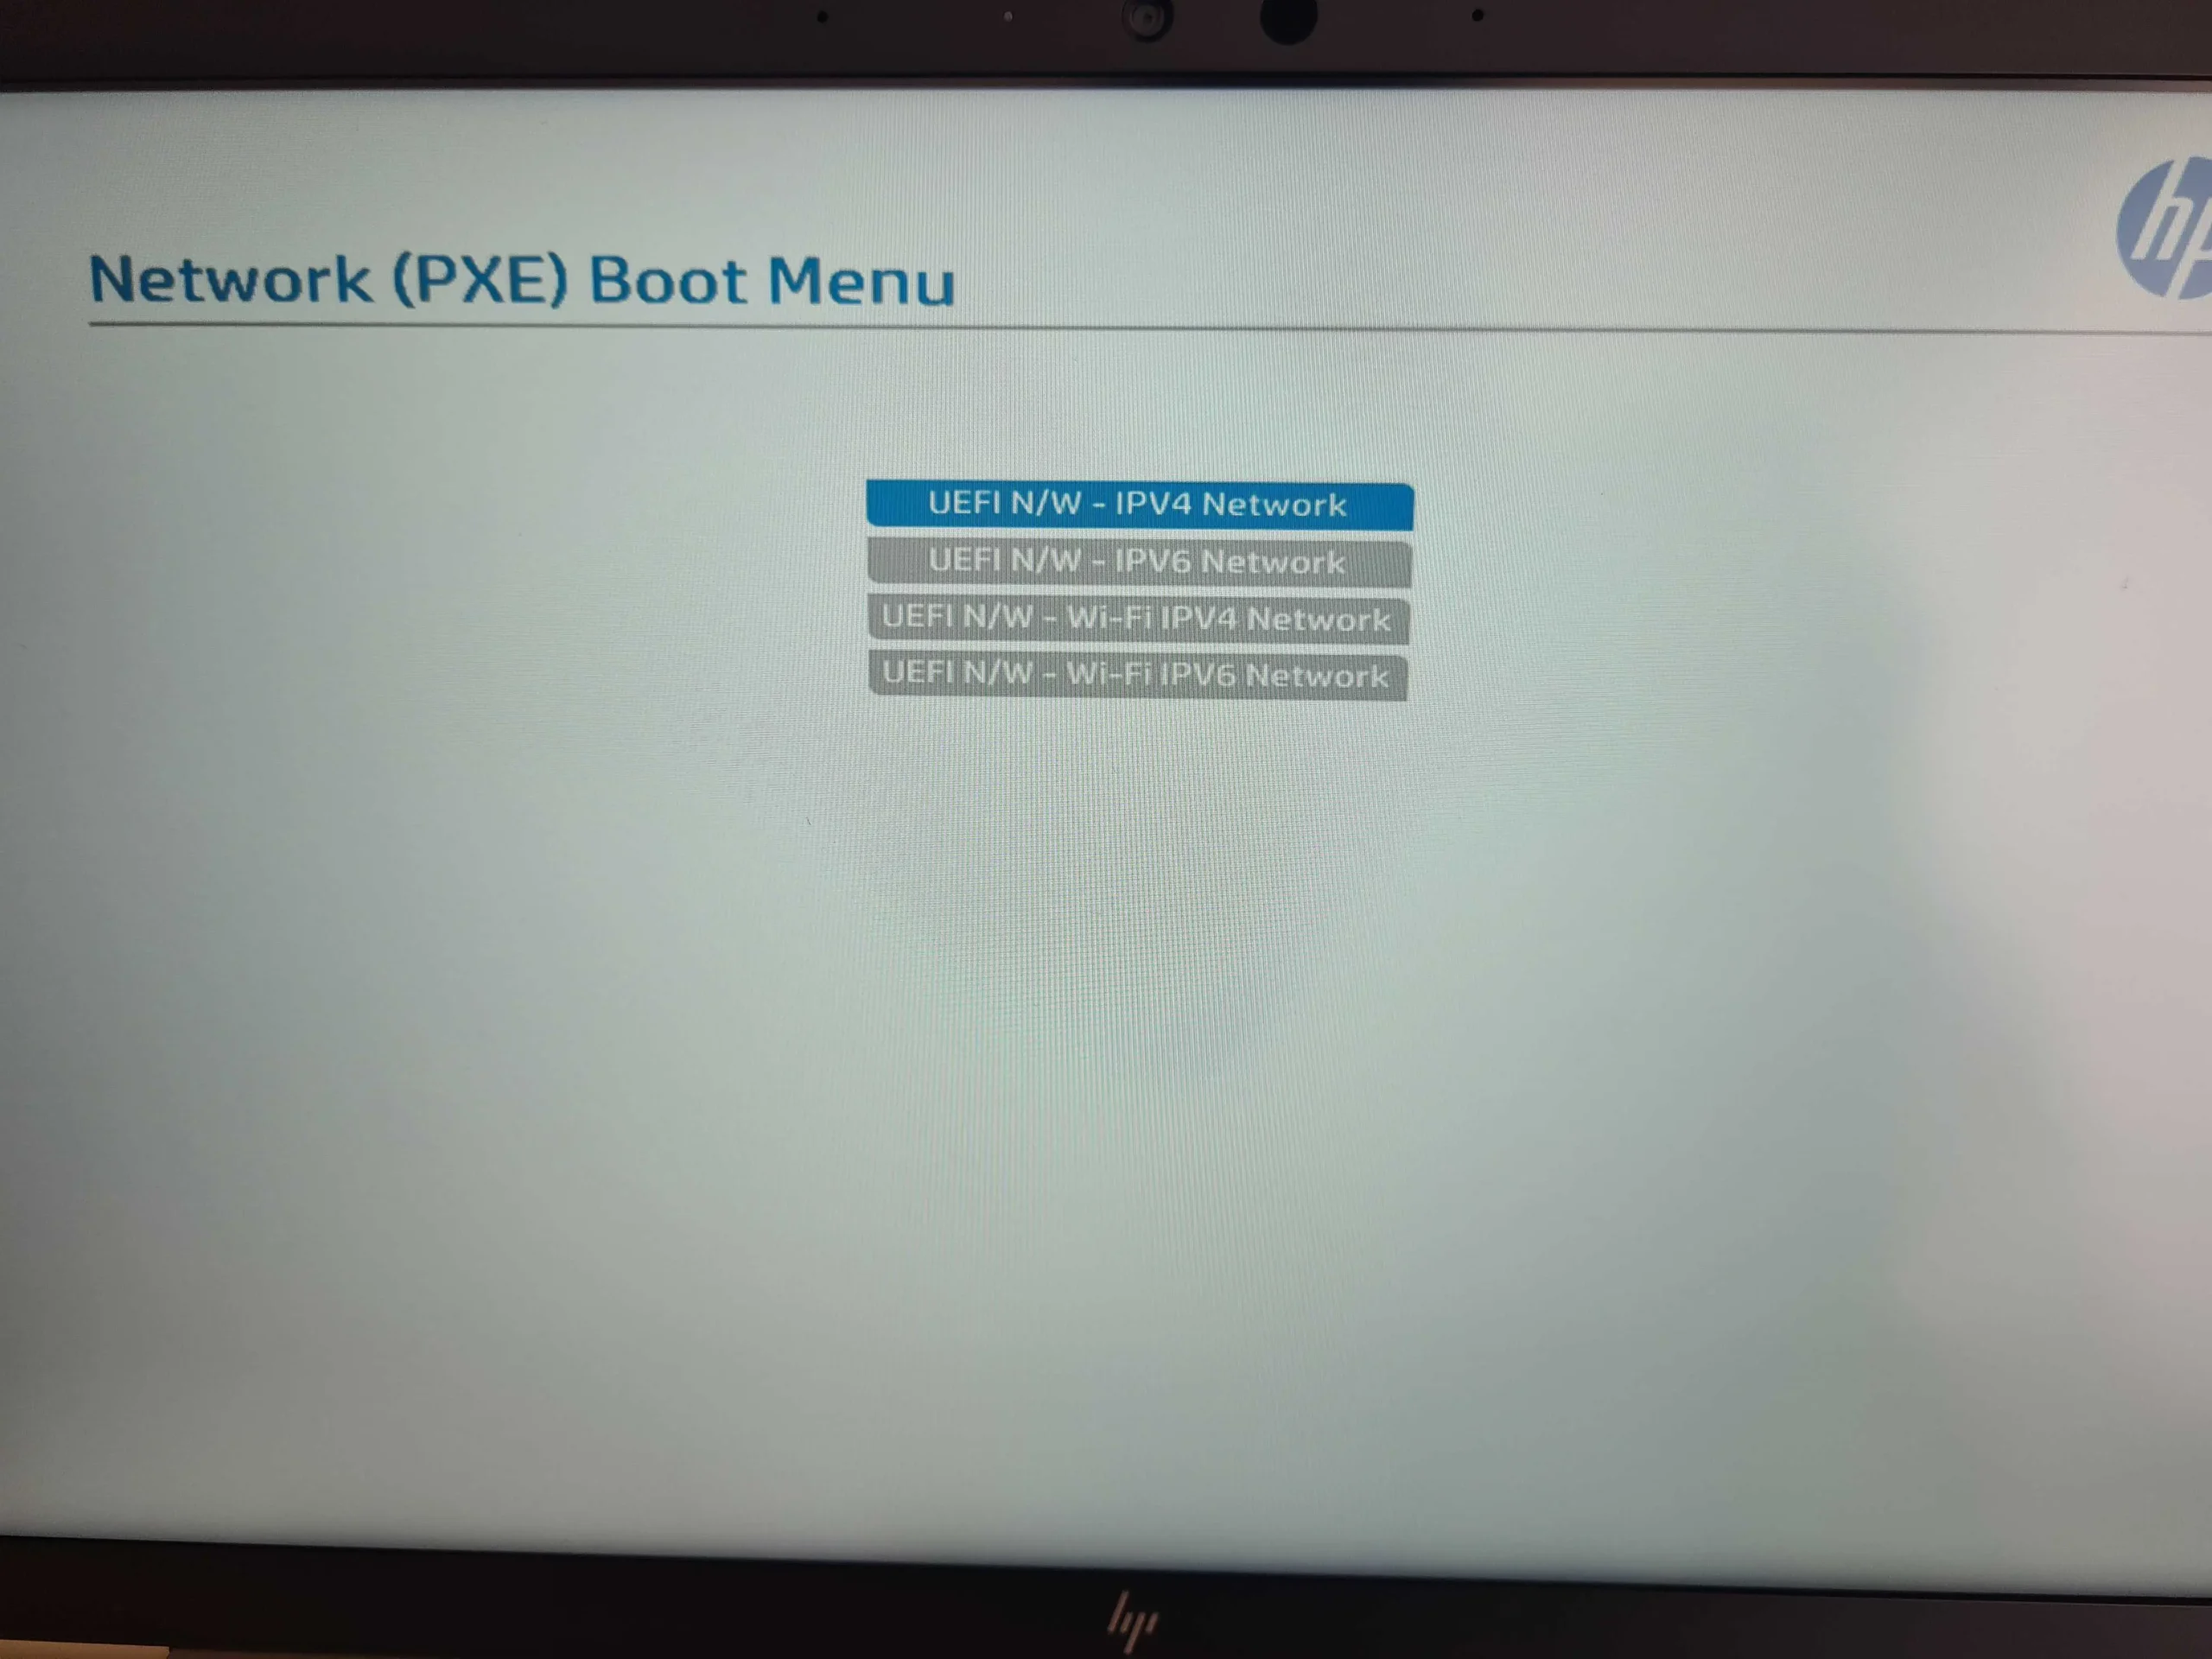 hewlett-packard computer setup pxe boot - How do I enable PXE boot on HP BIOS